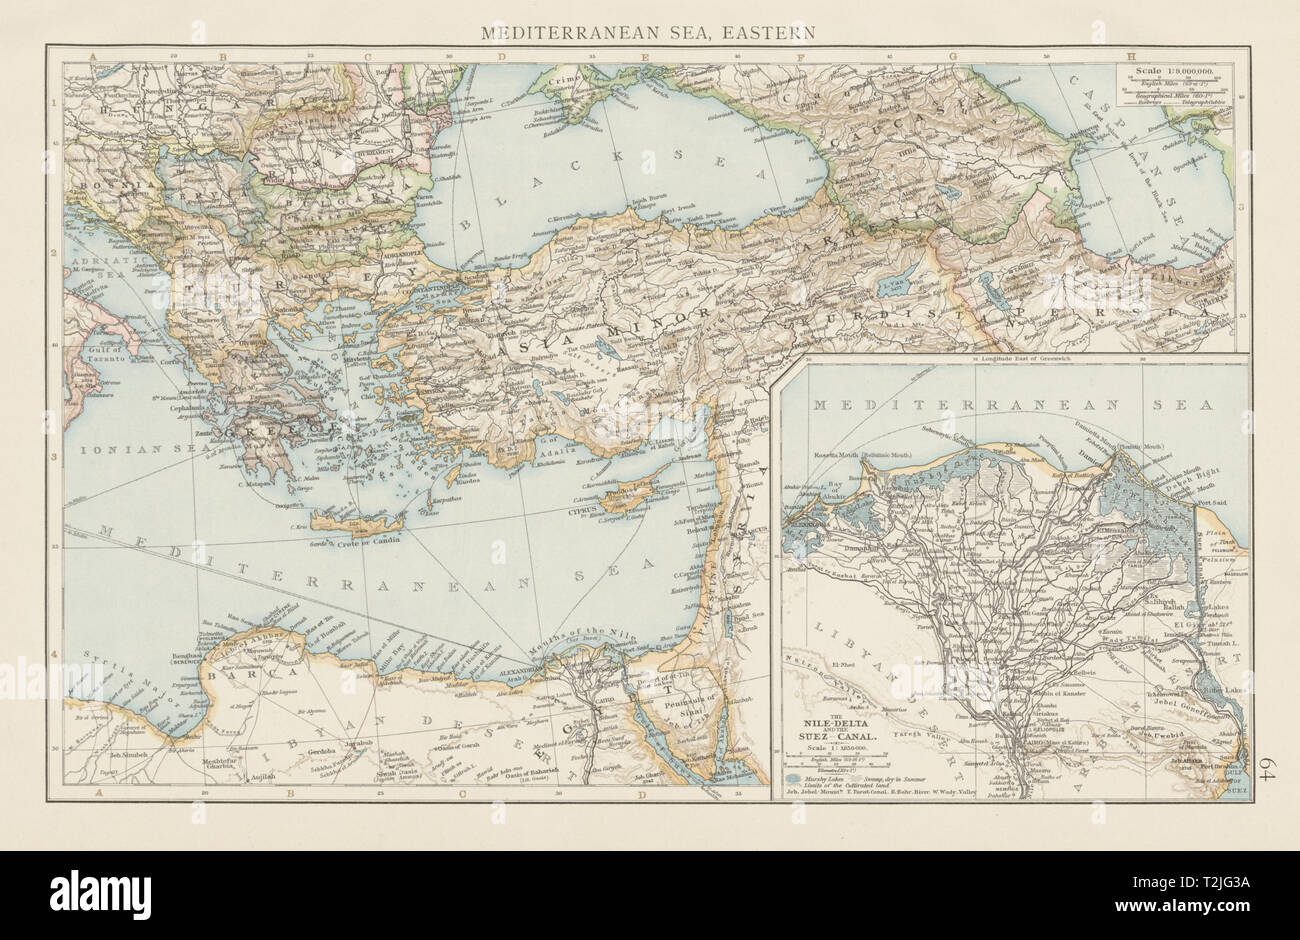 Eastern Mediterranean sea. Nile delta. Suez canal. THE TIMES 1900 old map Stock Photo